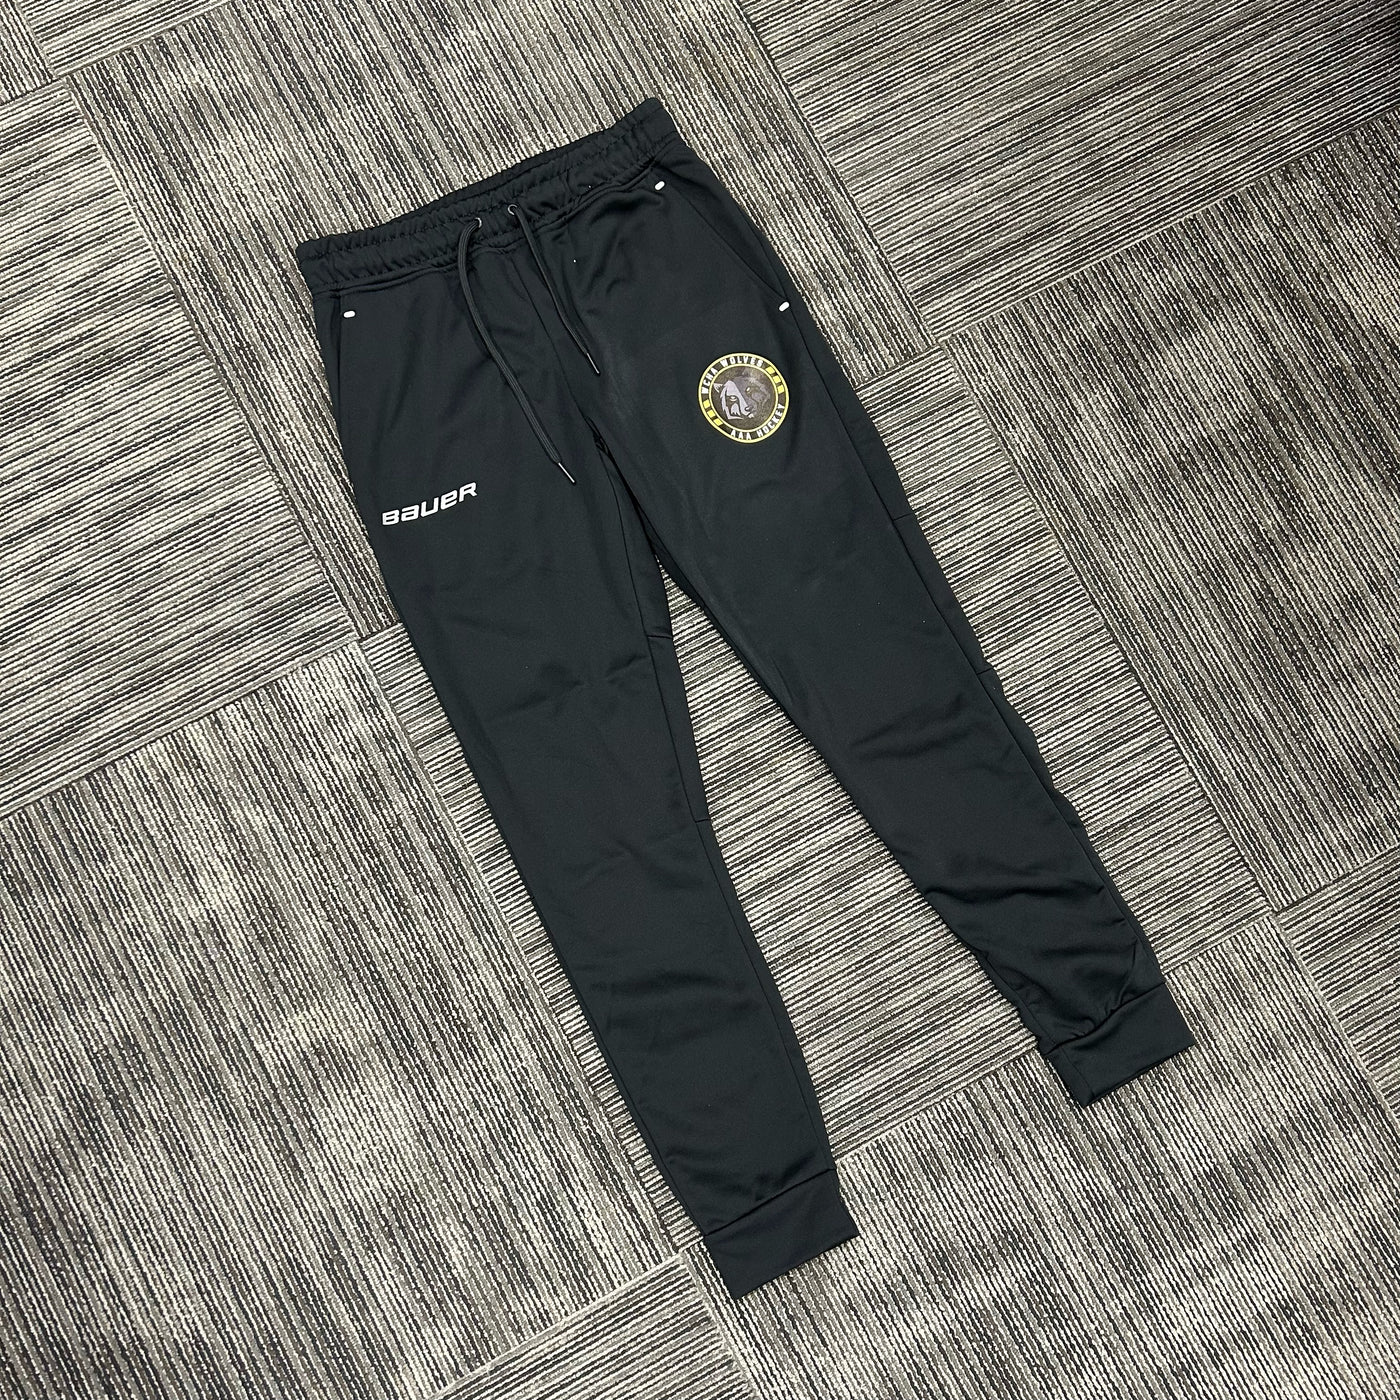 AAA Spring Team Adult Bauer Joggers